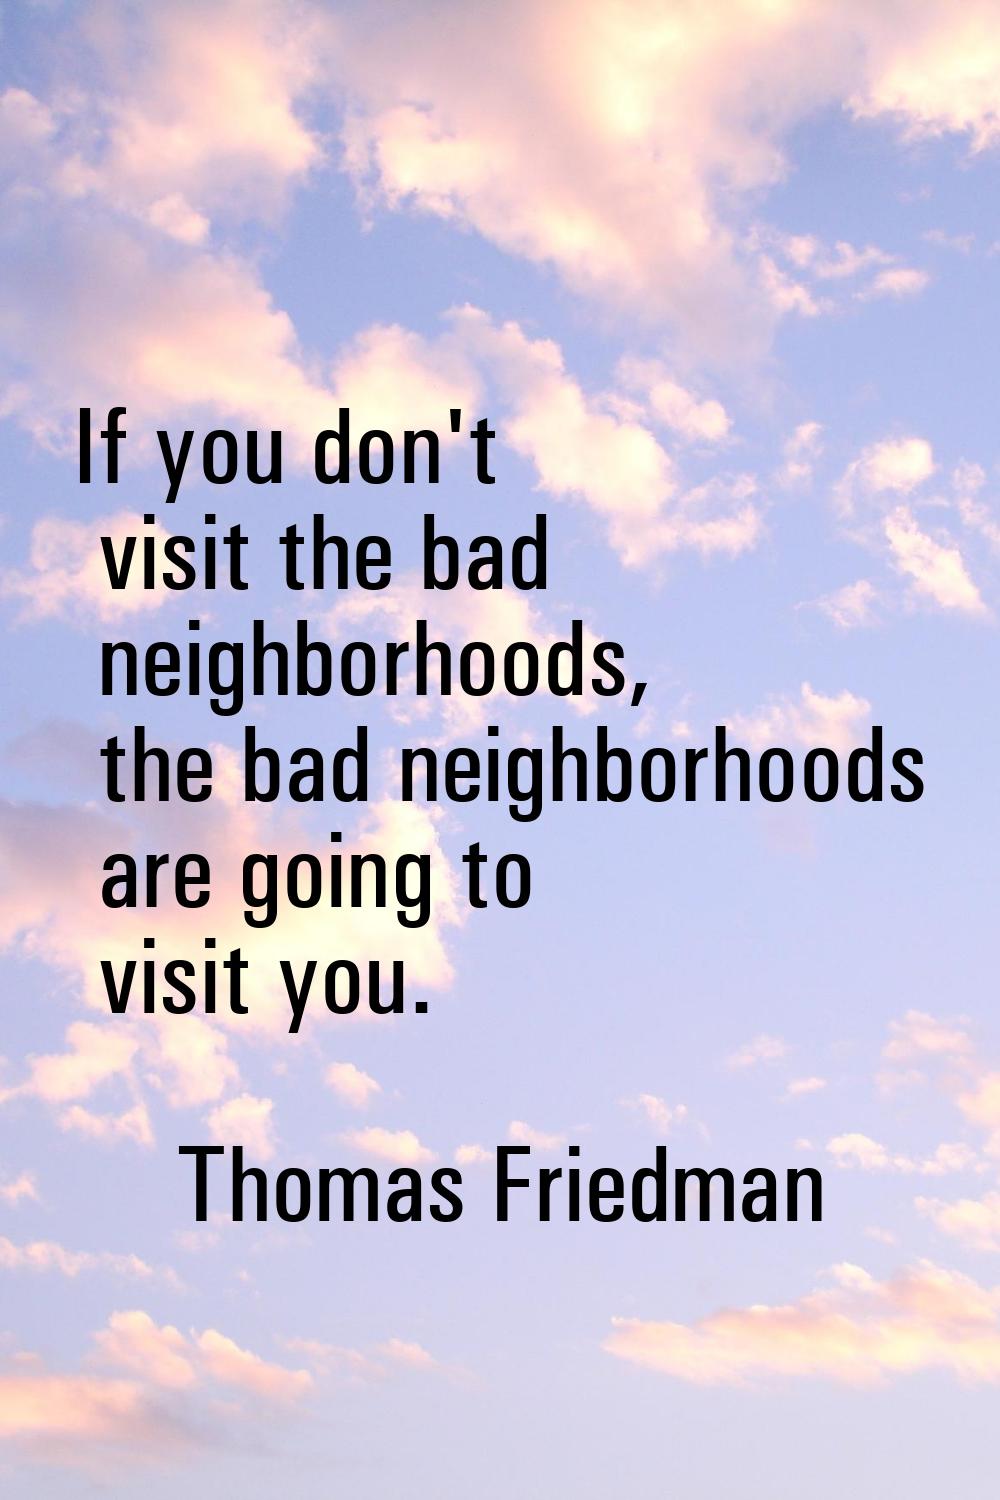 If you don't visit the bad neighborhoods, the bad neighborhoods are going to visit you.